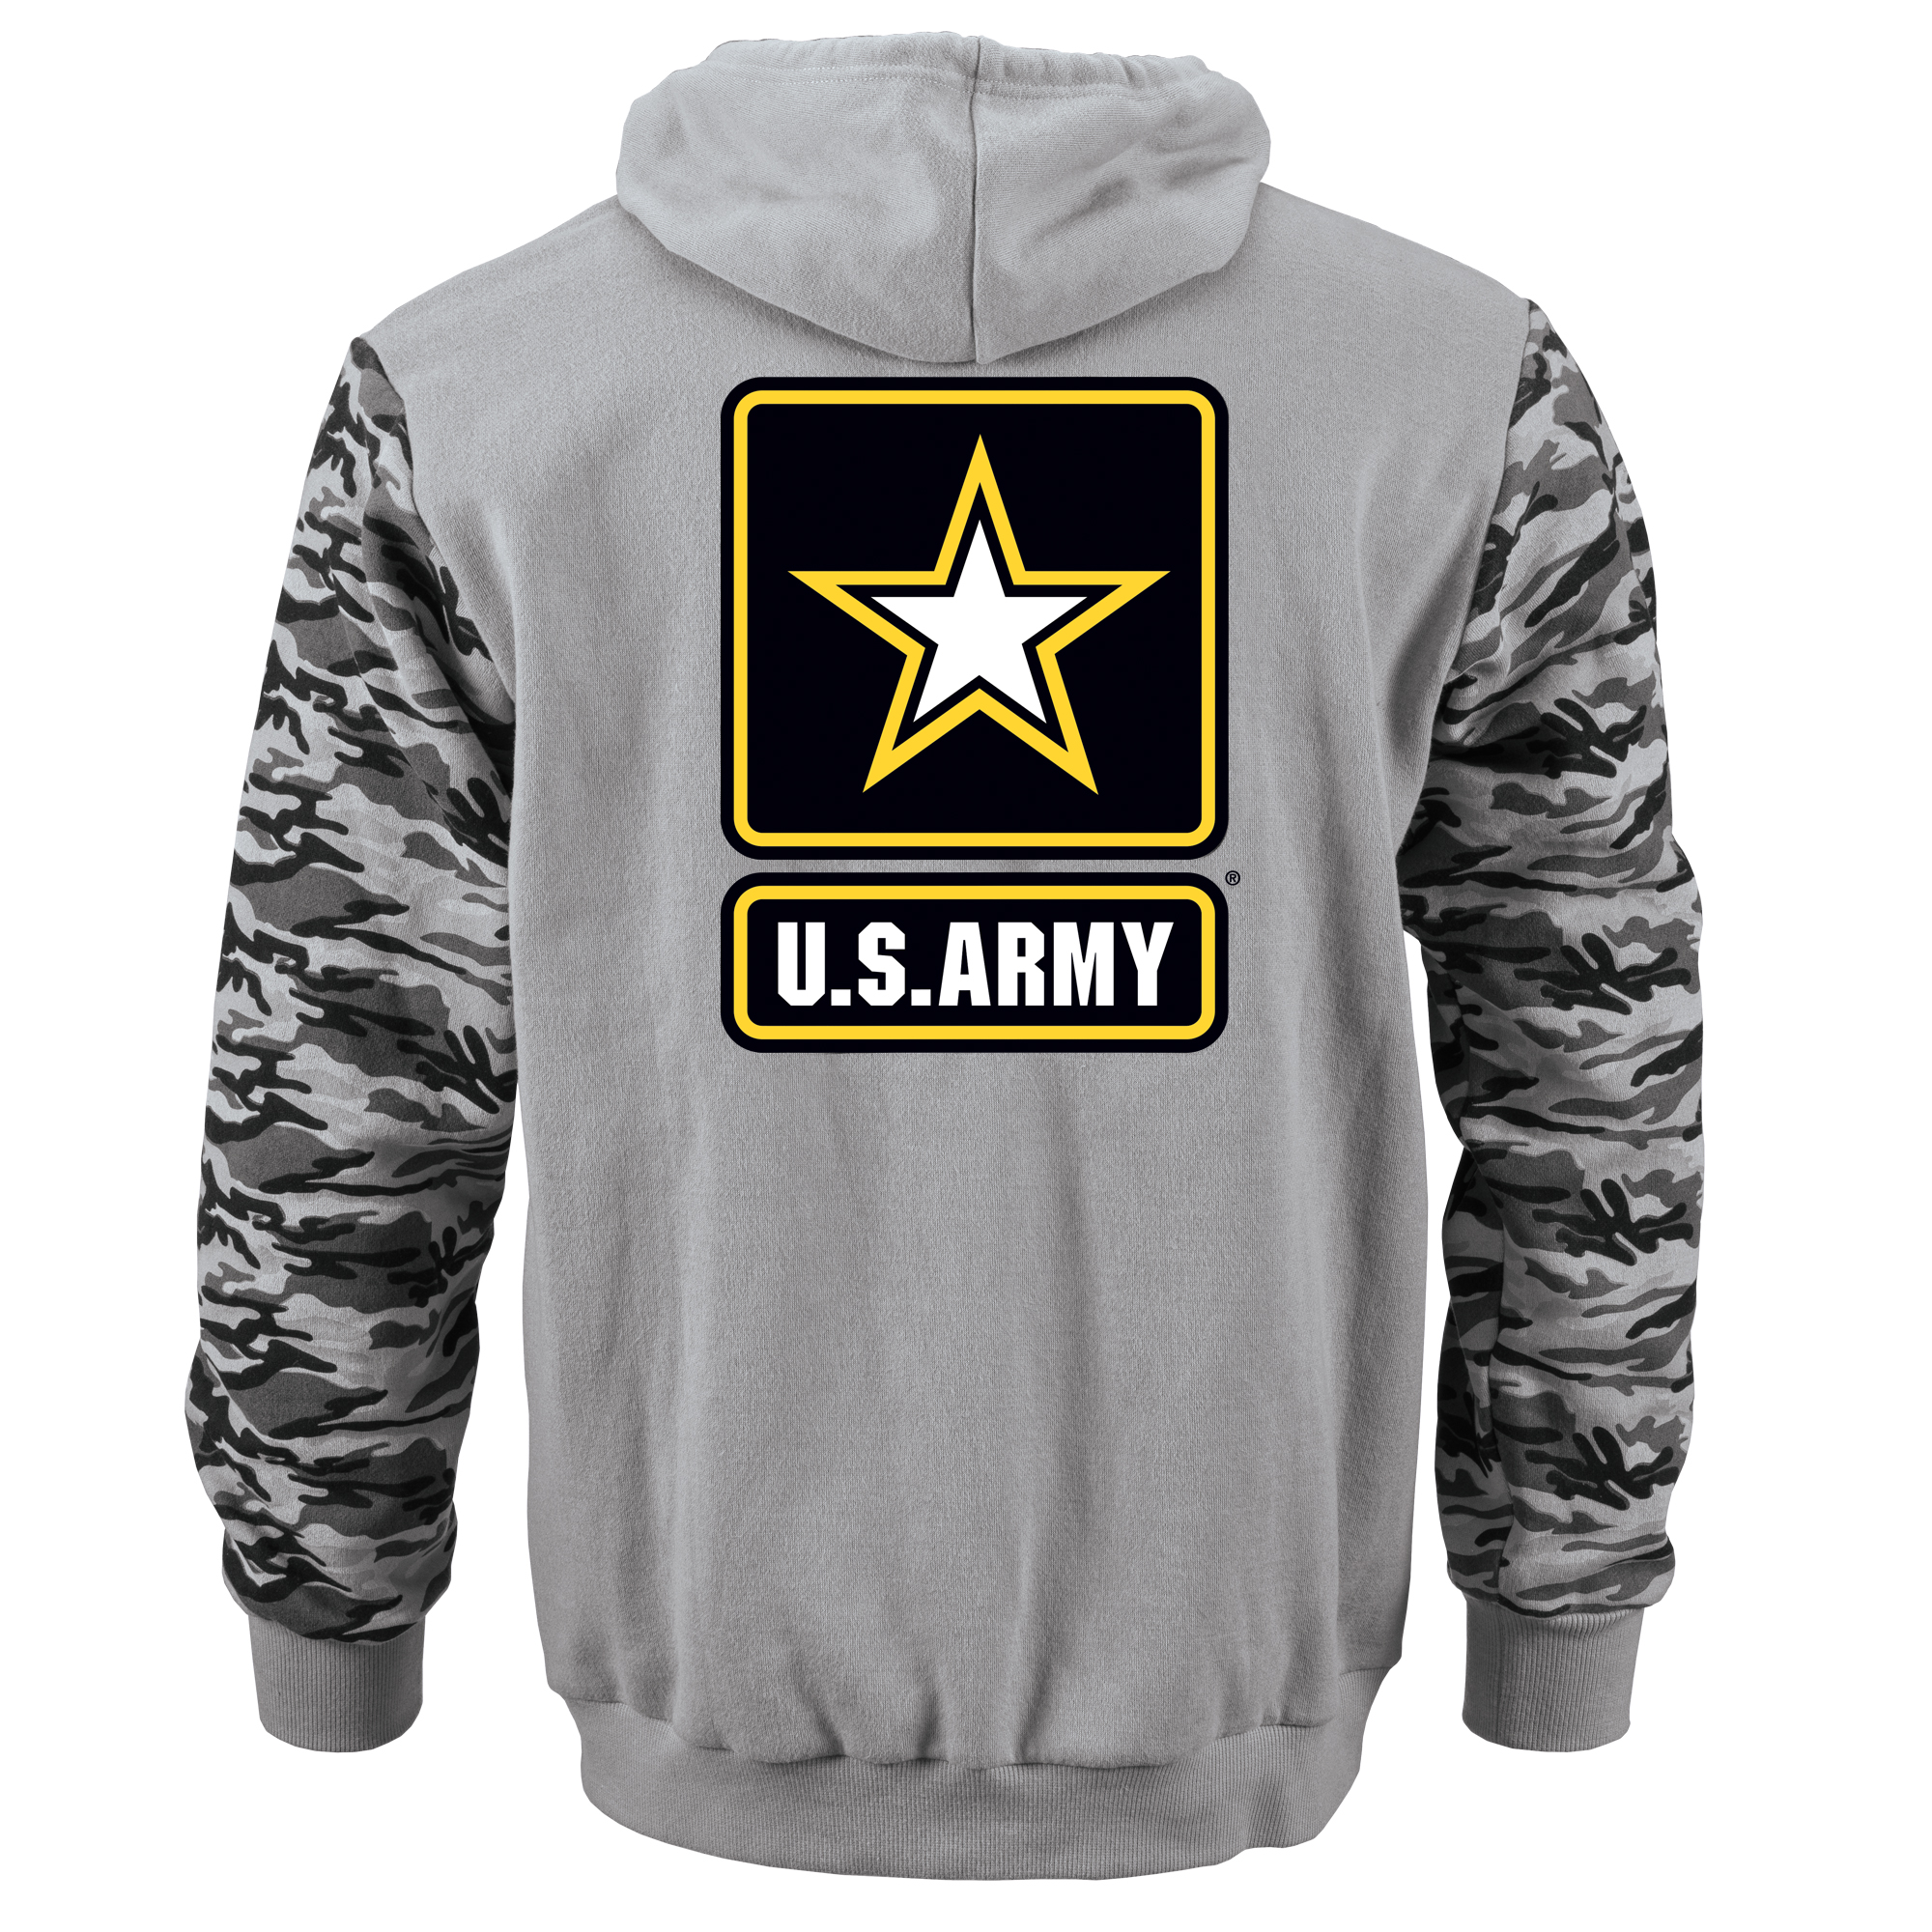 Personalized US Army Hoodie 10117 0017 a main